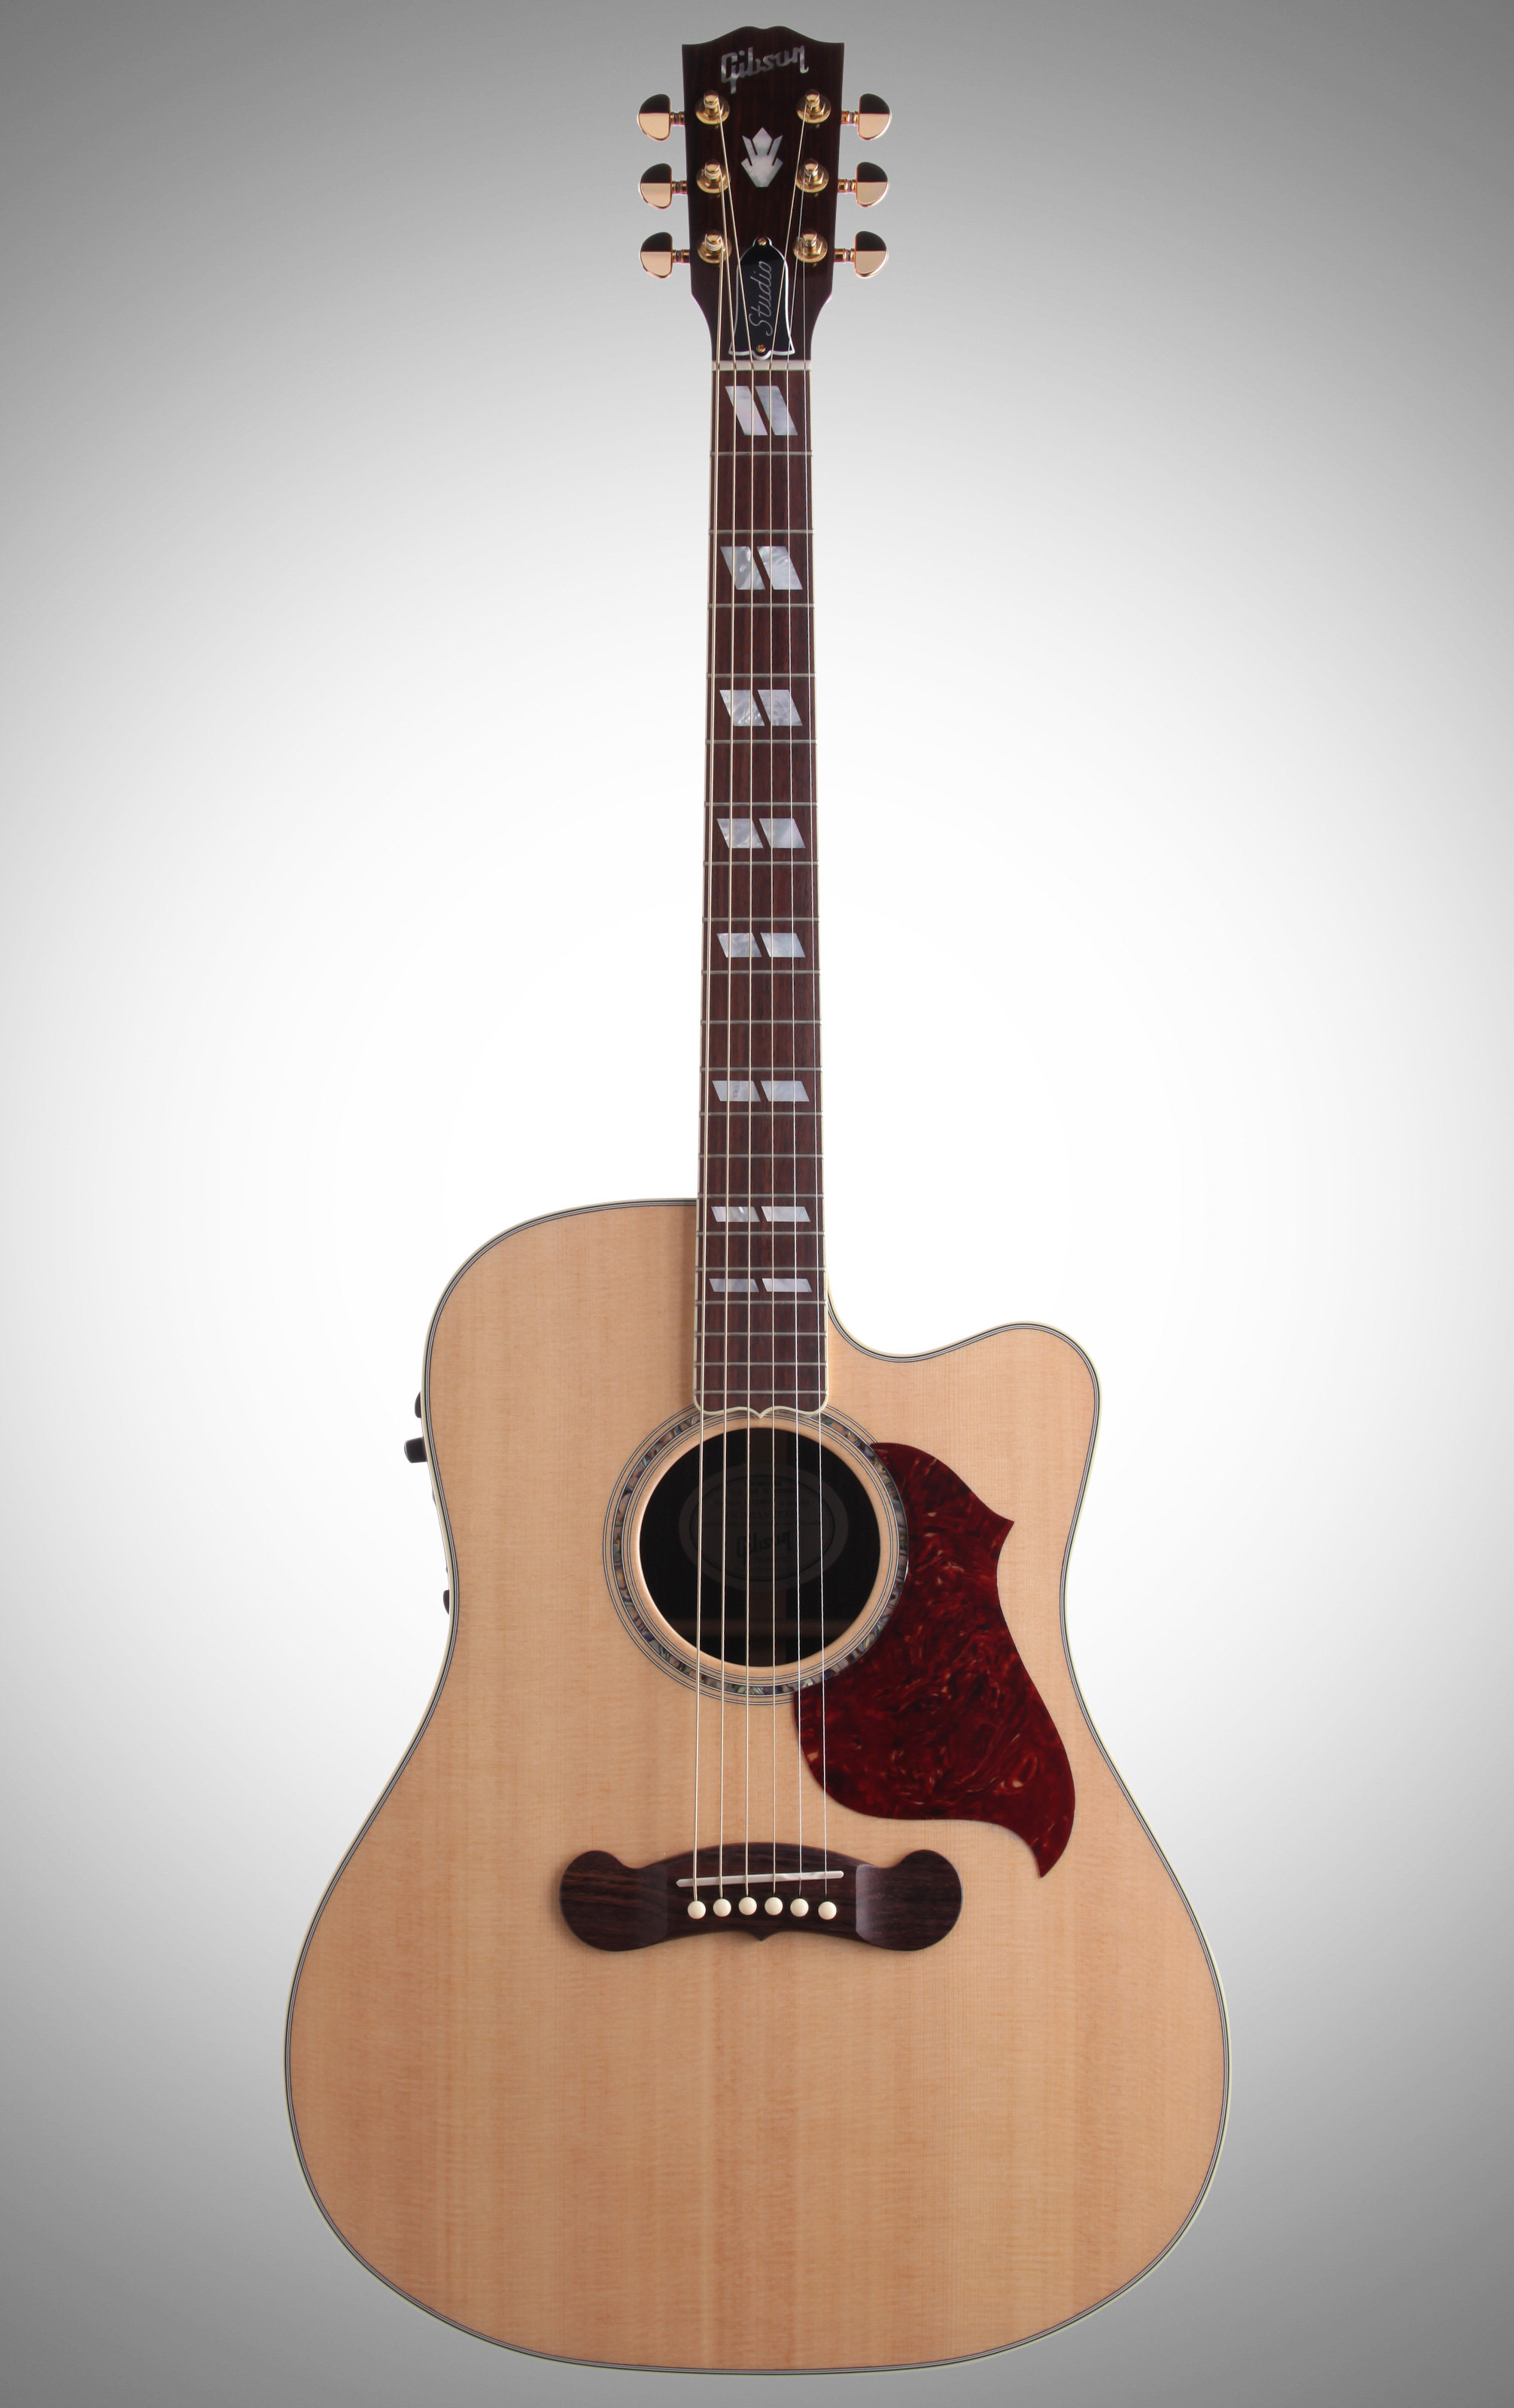 gibson acoustic guitar